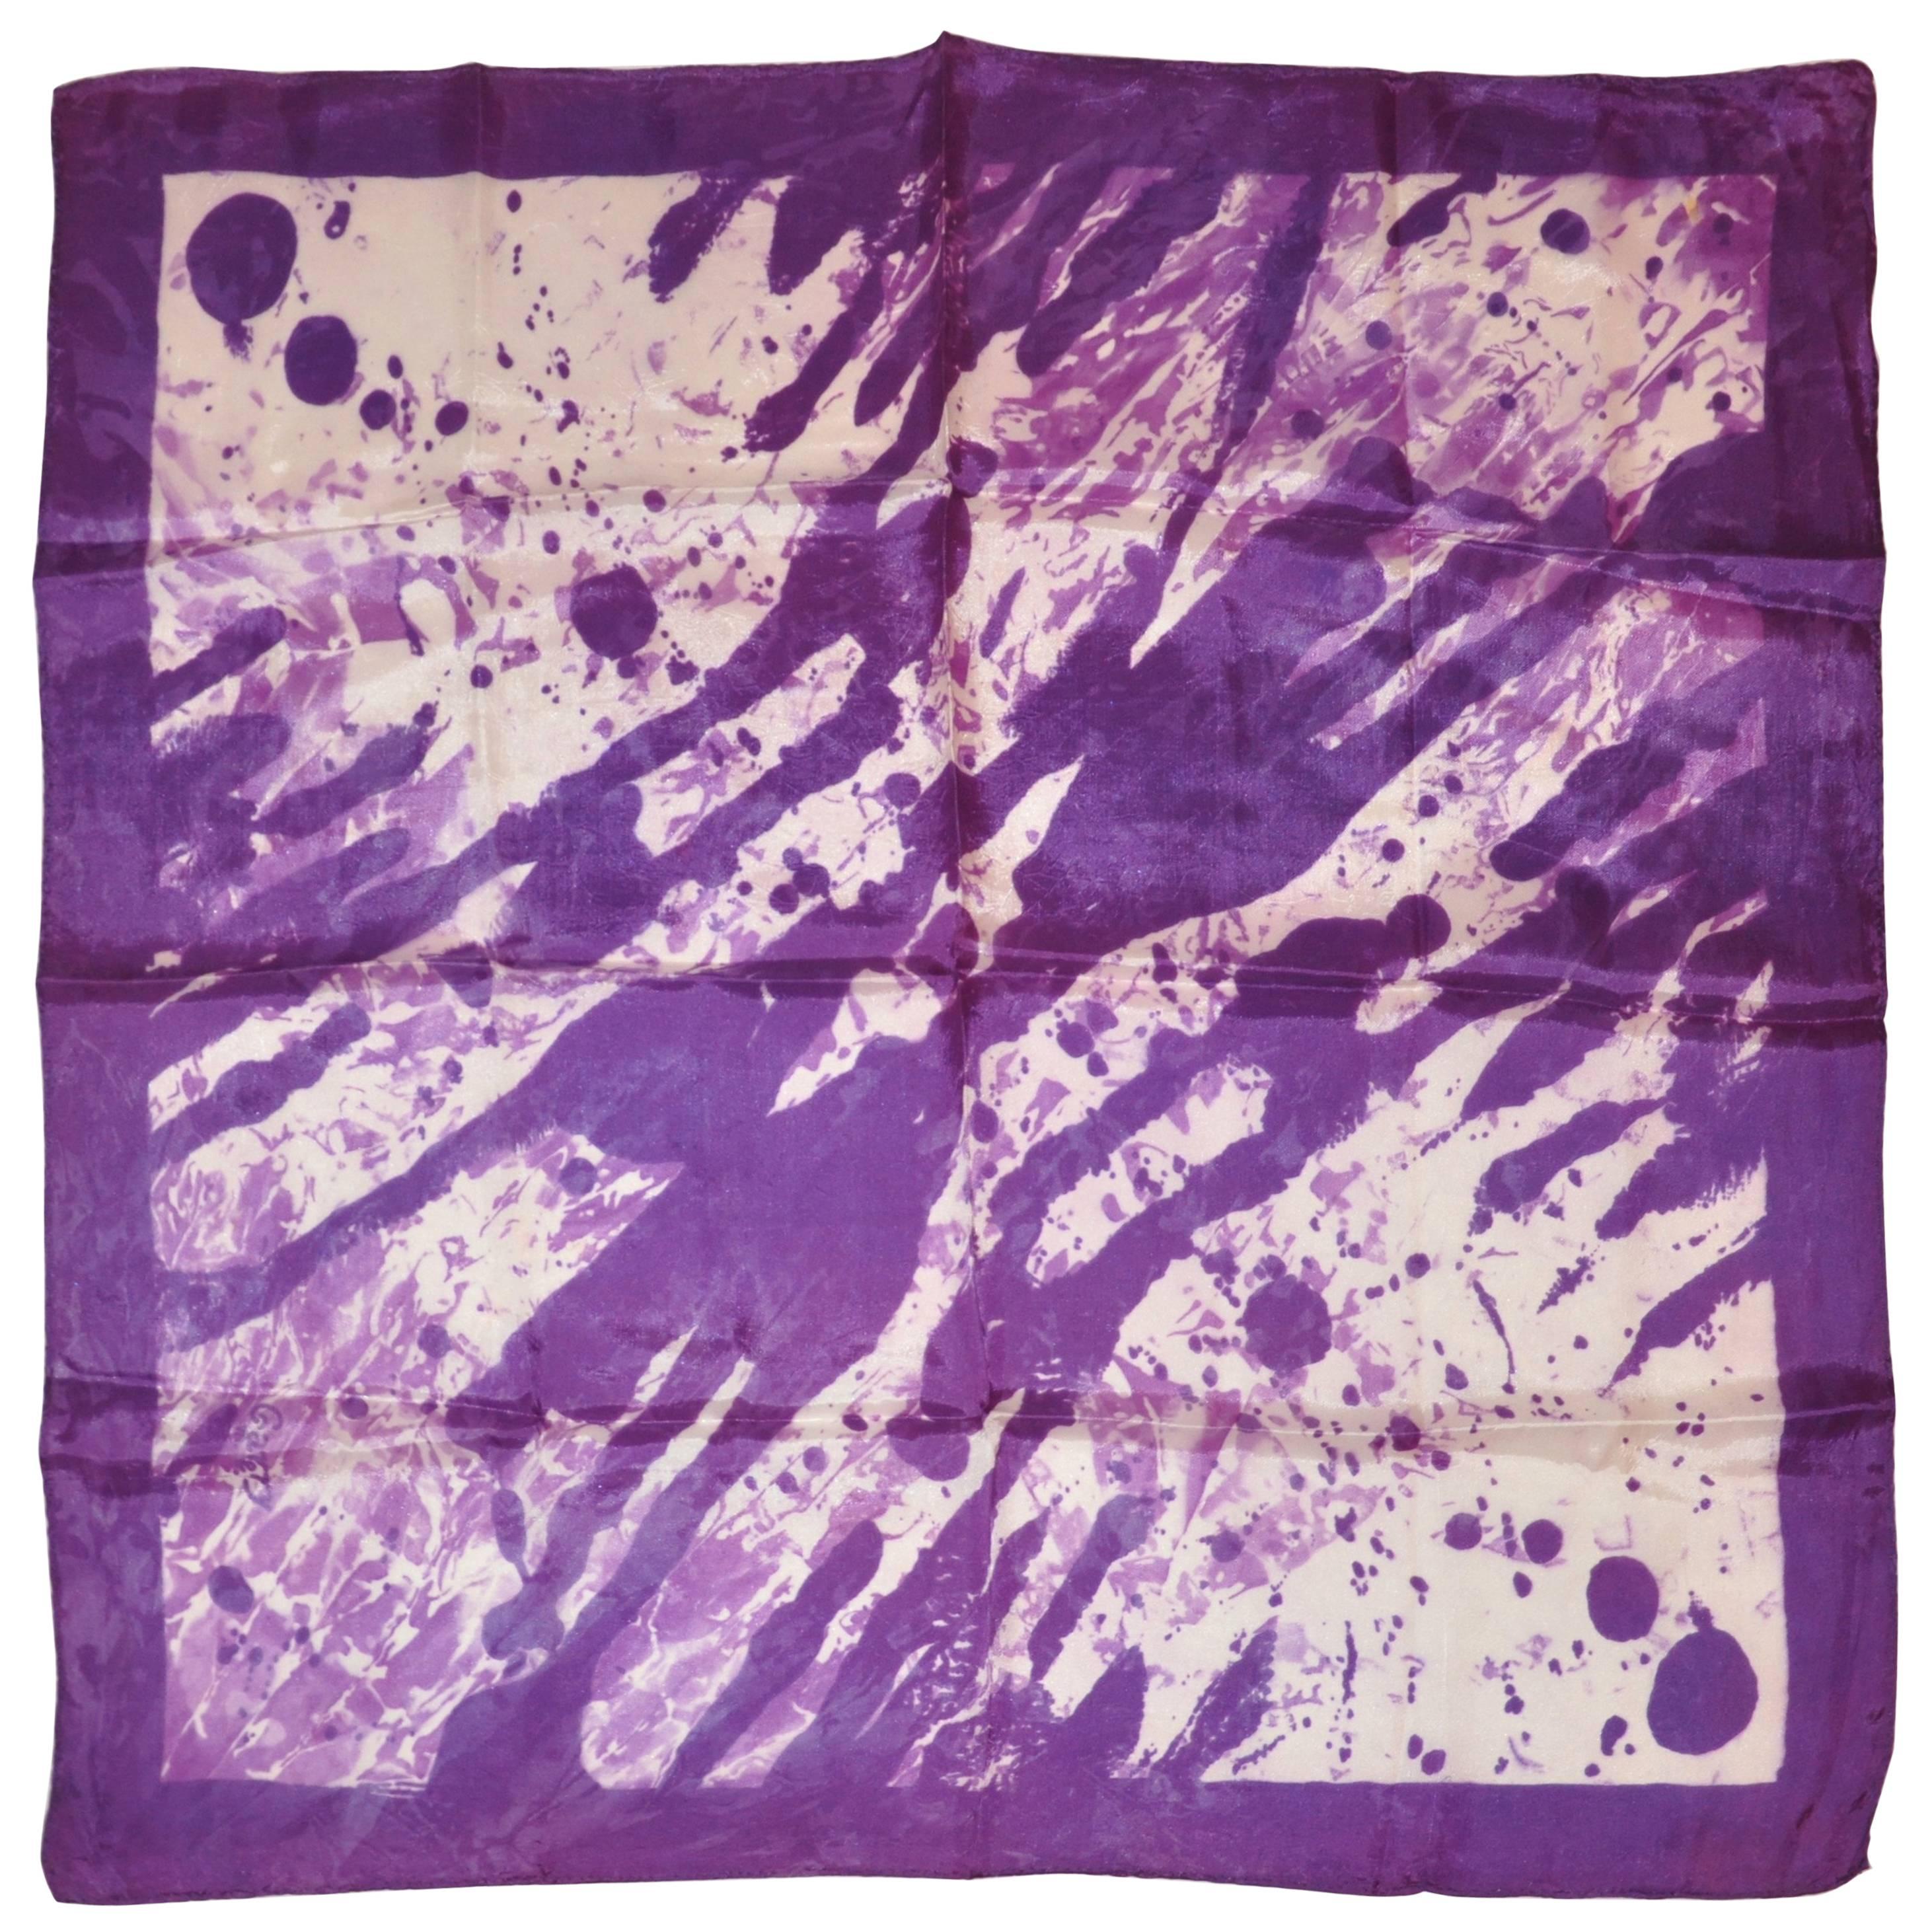 Purple, Violet & White "Tie Dye" Style Scarf For Sale